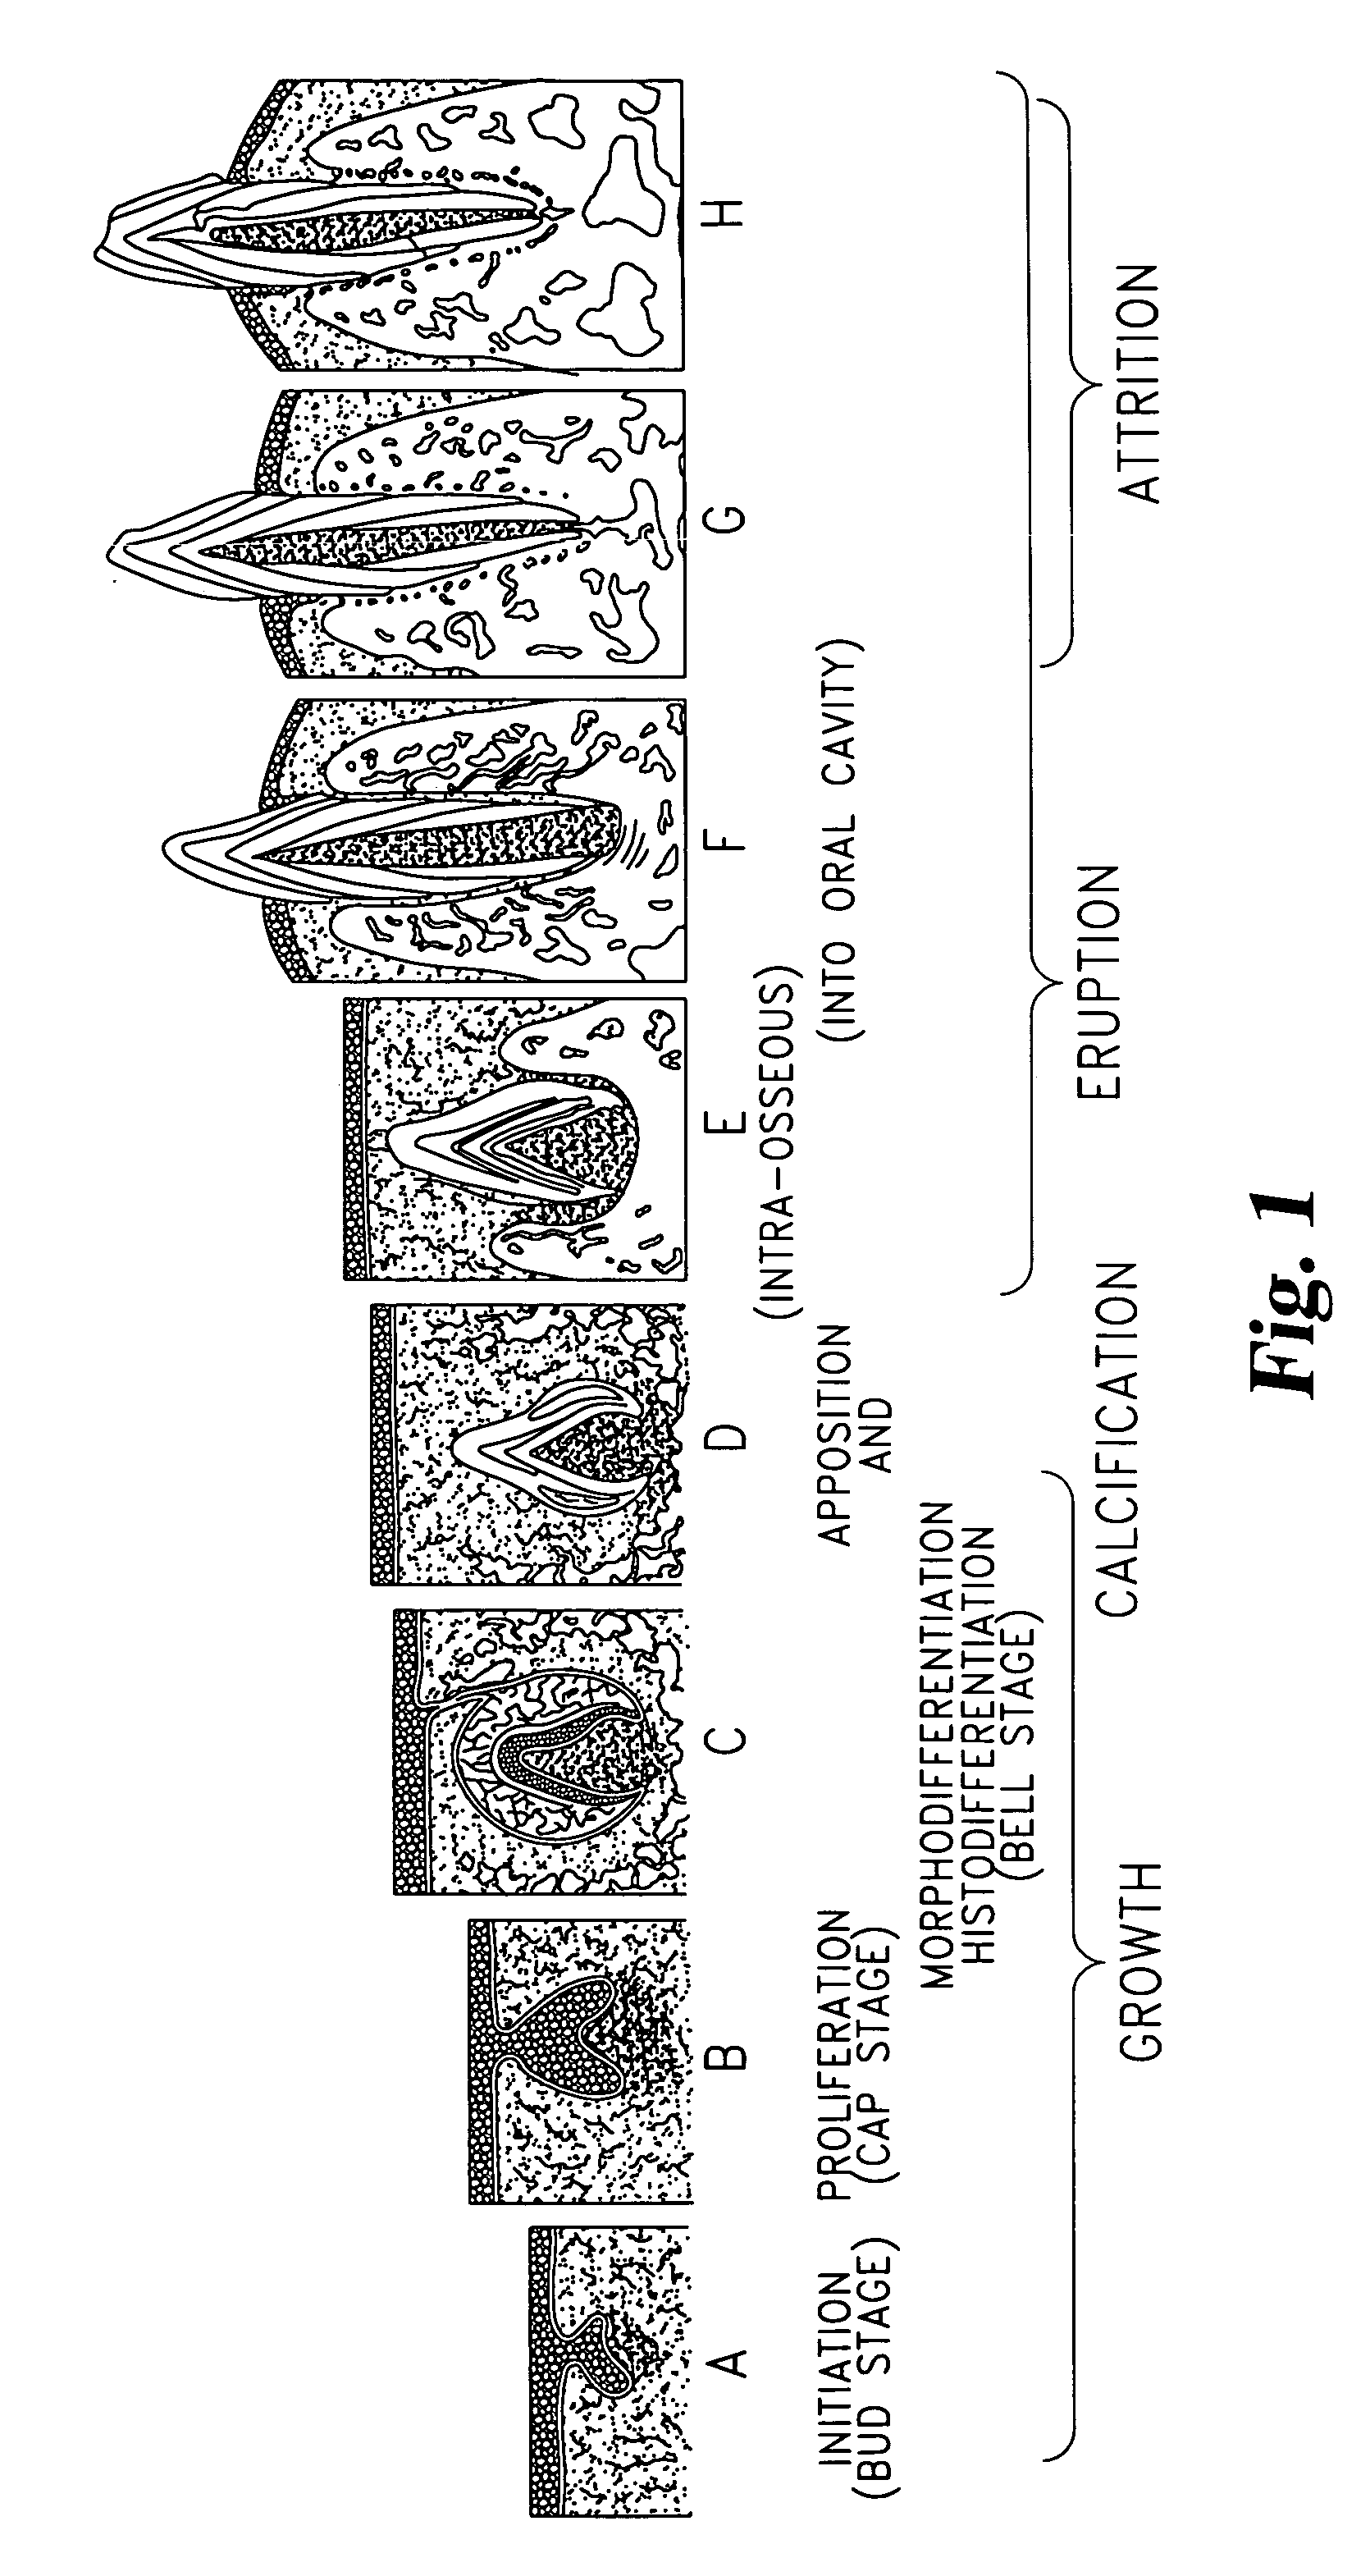 Method for obtaining and storing multipotent stem cells